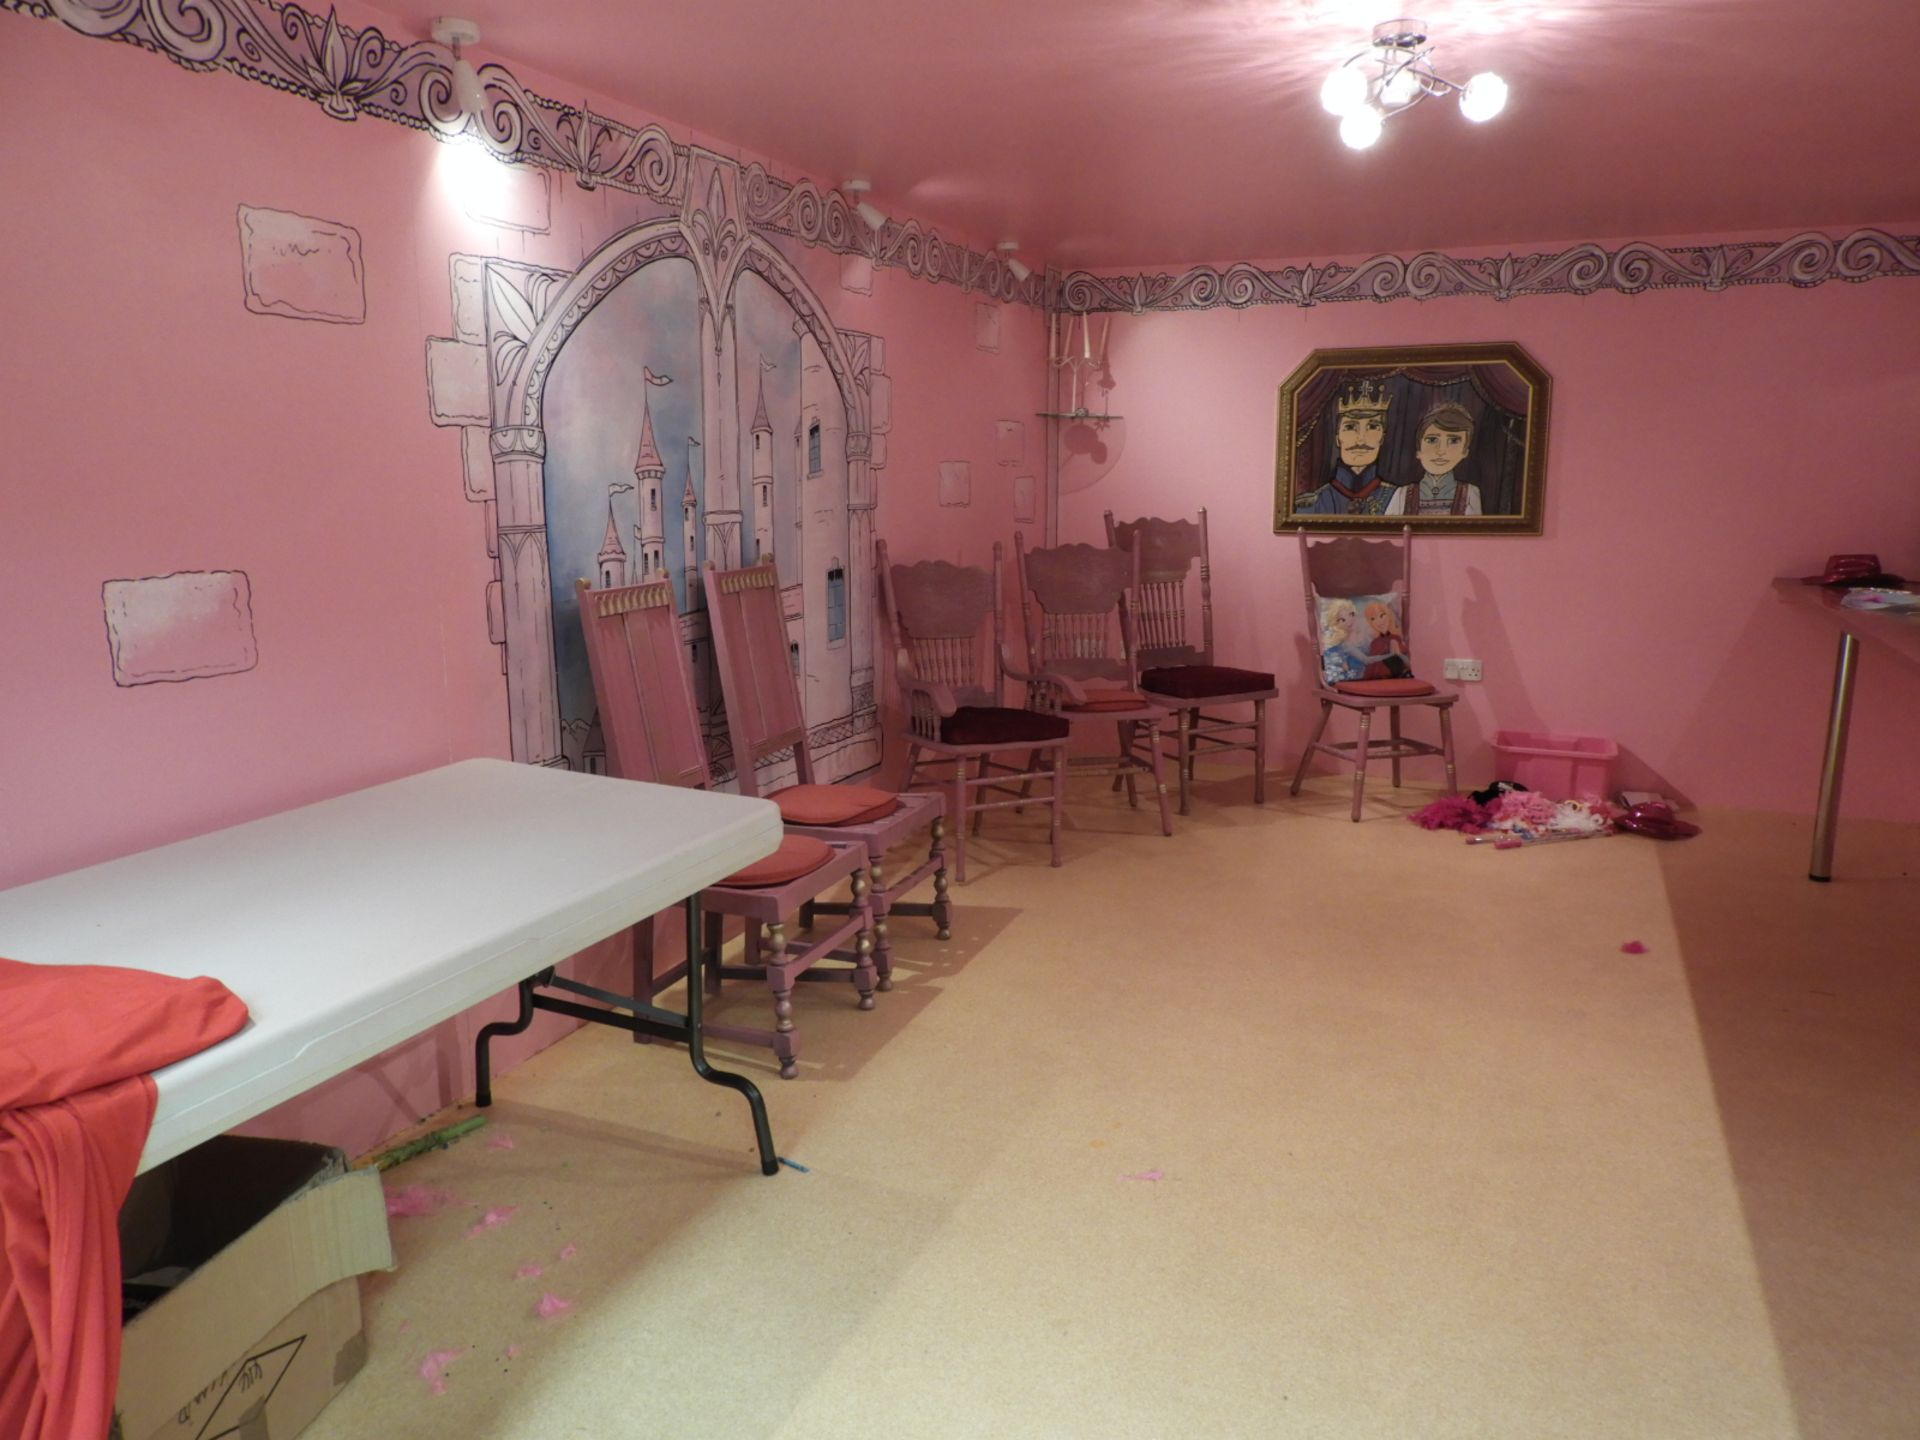 *The Contents of the Princess Party Room - Image 4 of 4